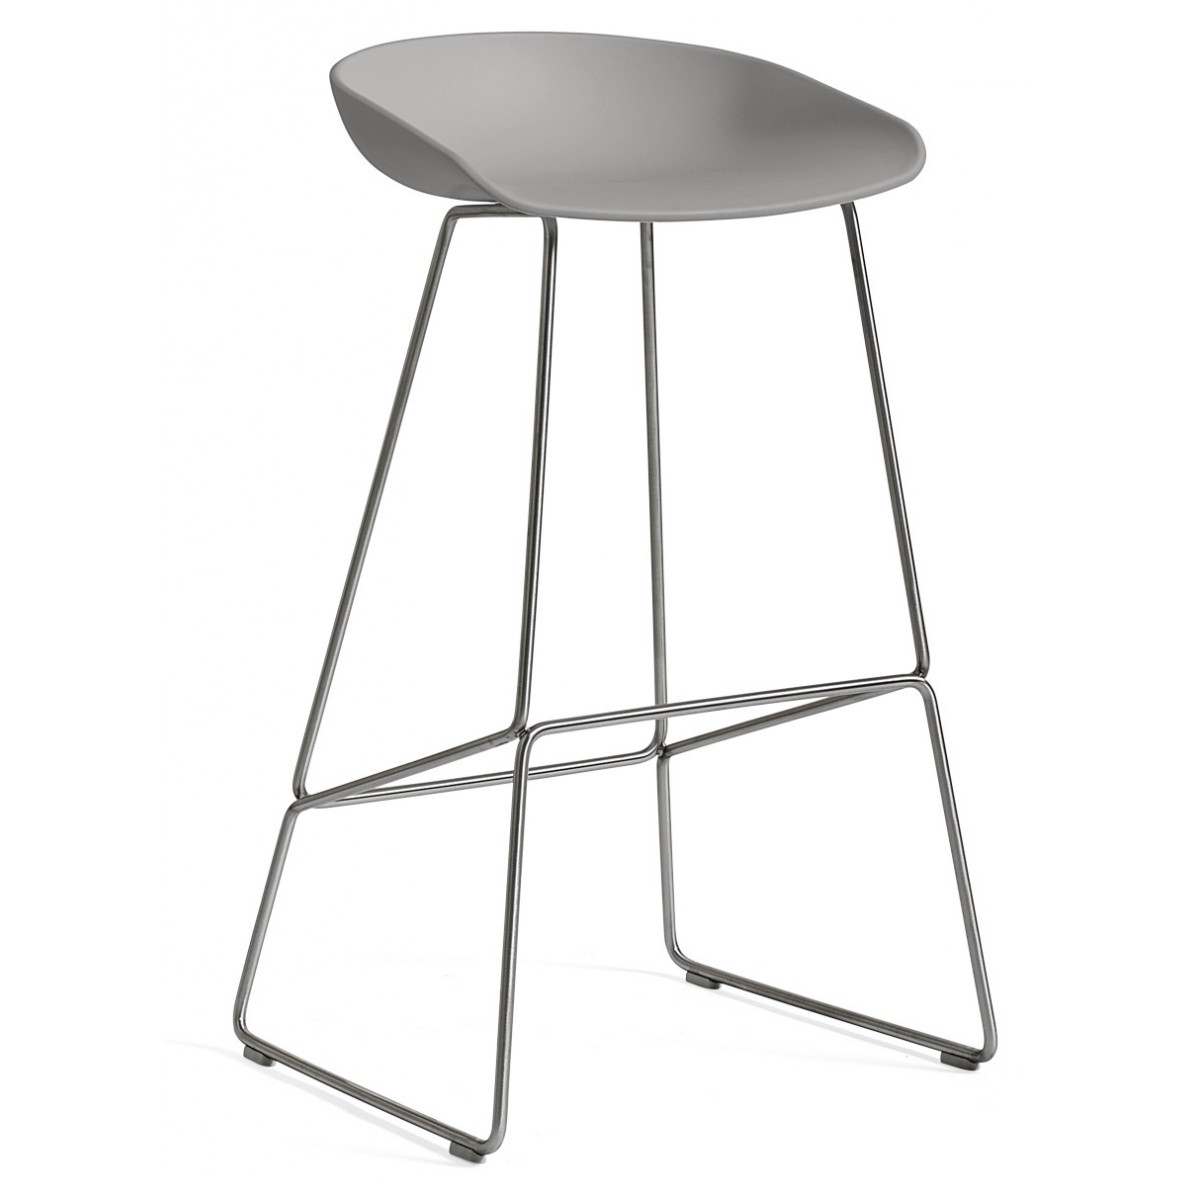 AAS38 Stool Concrete grey shell + Stainless steel base